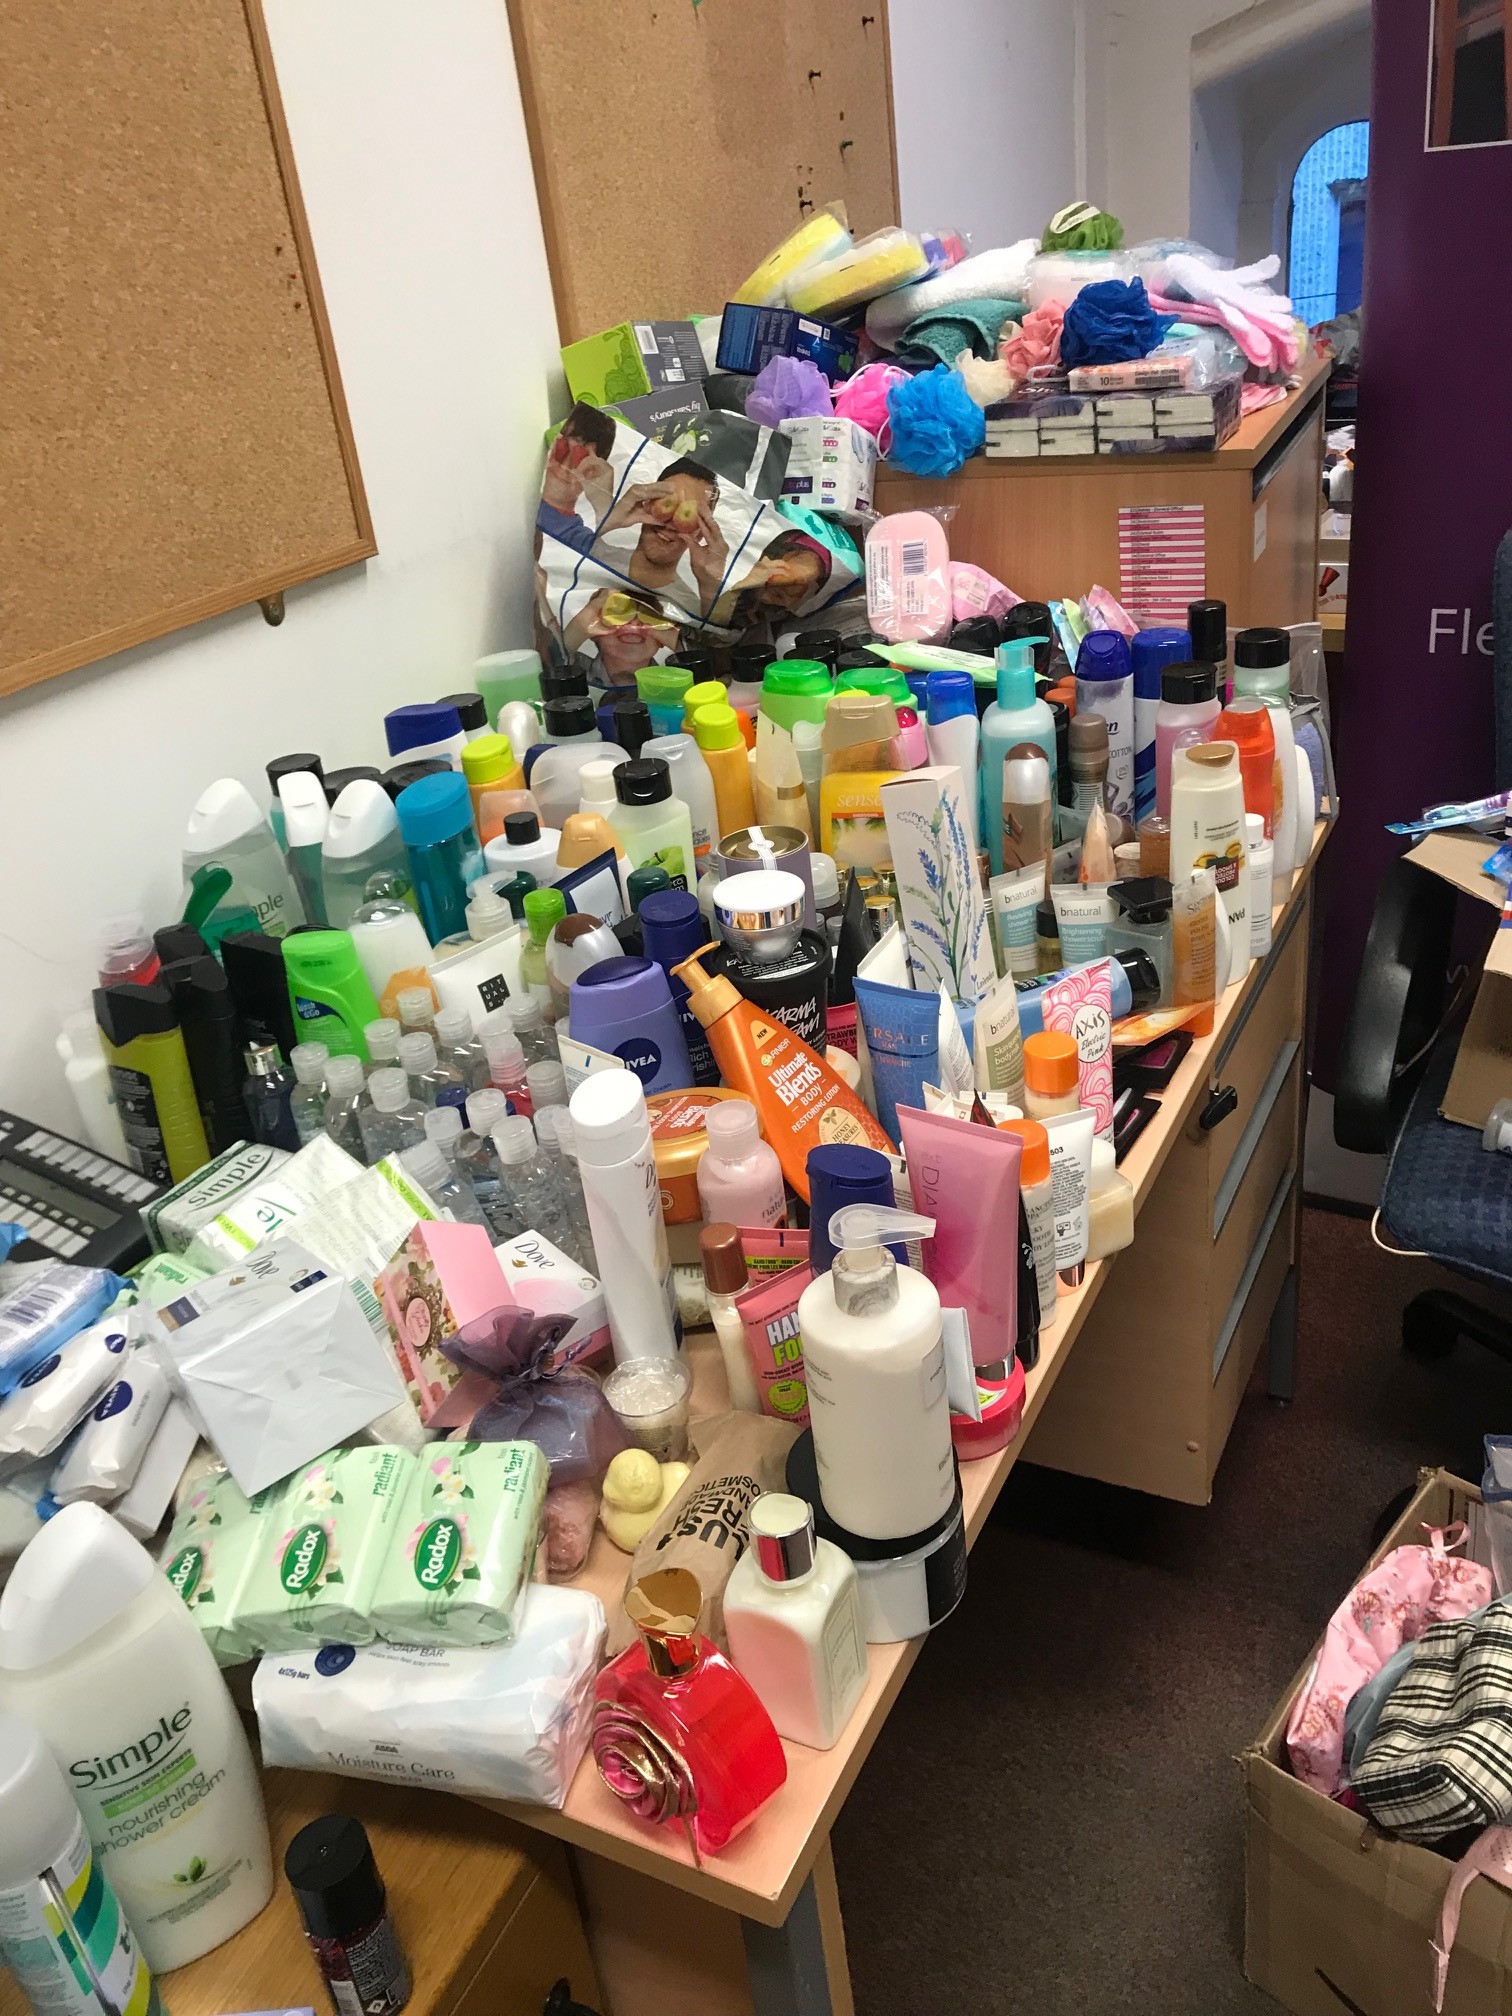 Hundreds of toiletries donated to homeless people in Dundee after Gowrie Care appeal